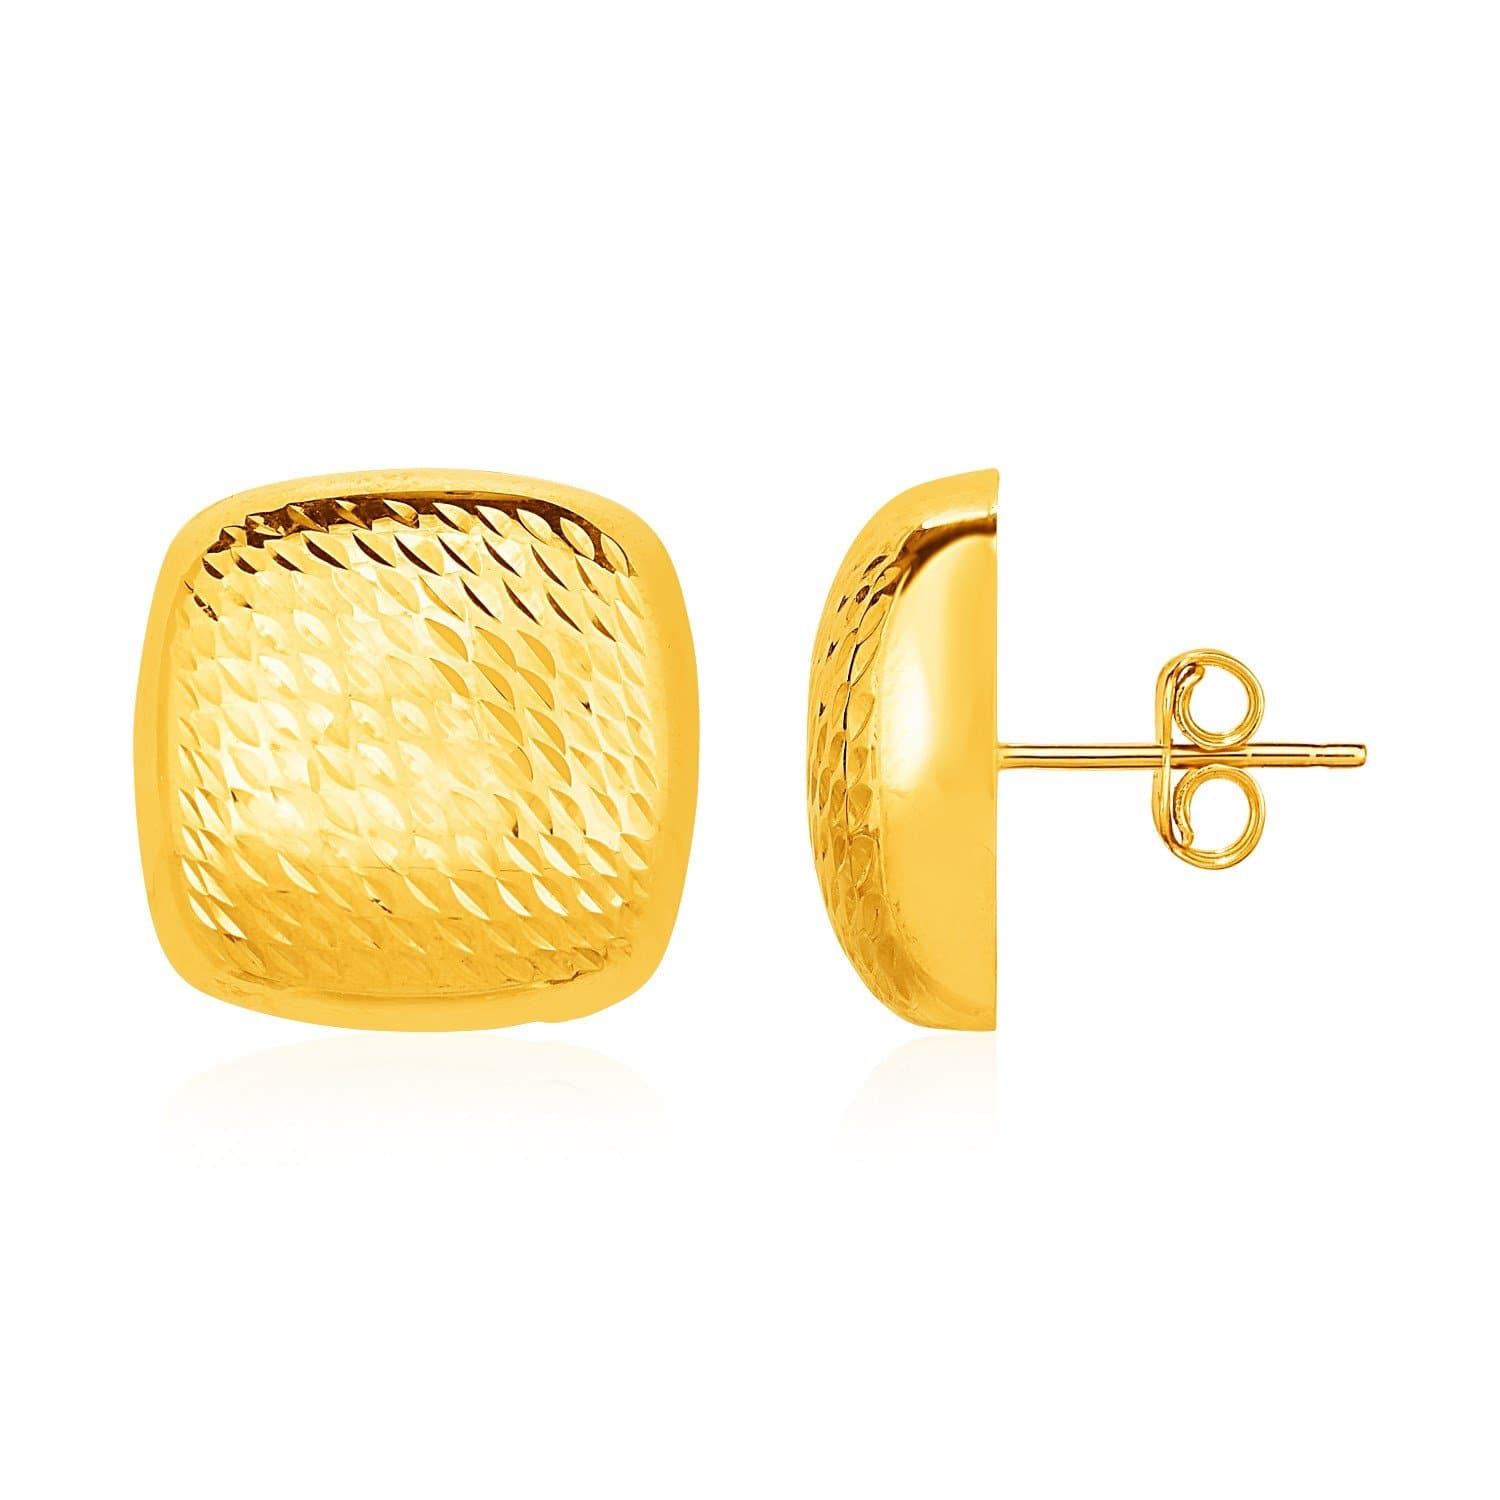 Textured Rounded Square Post Earrings in 14k Yellow Gold